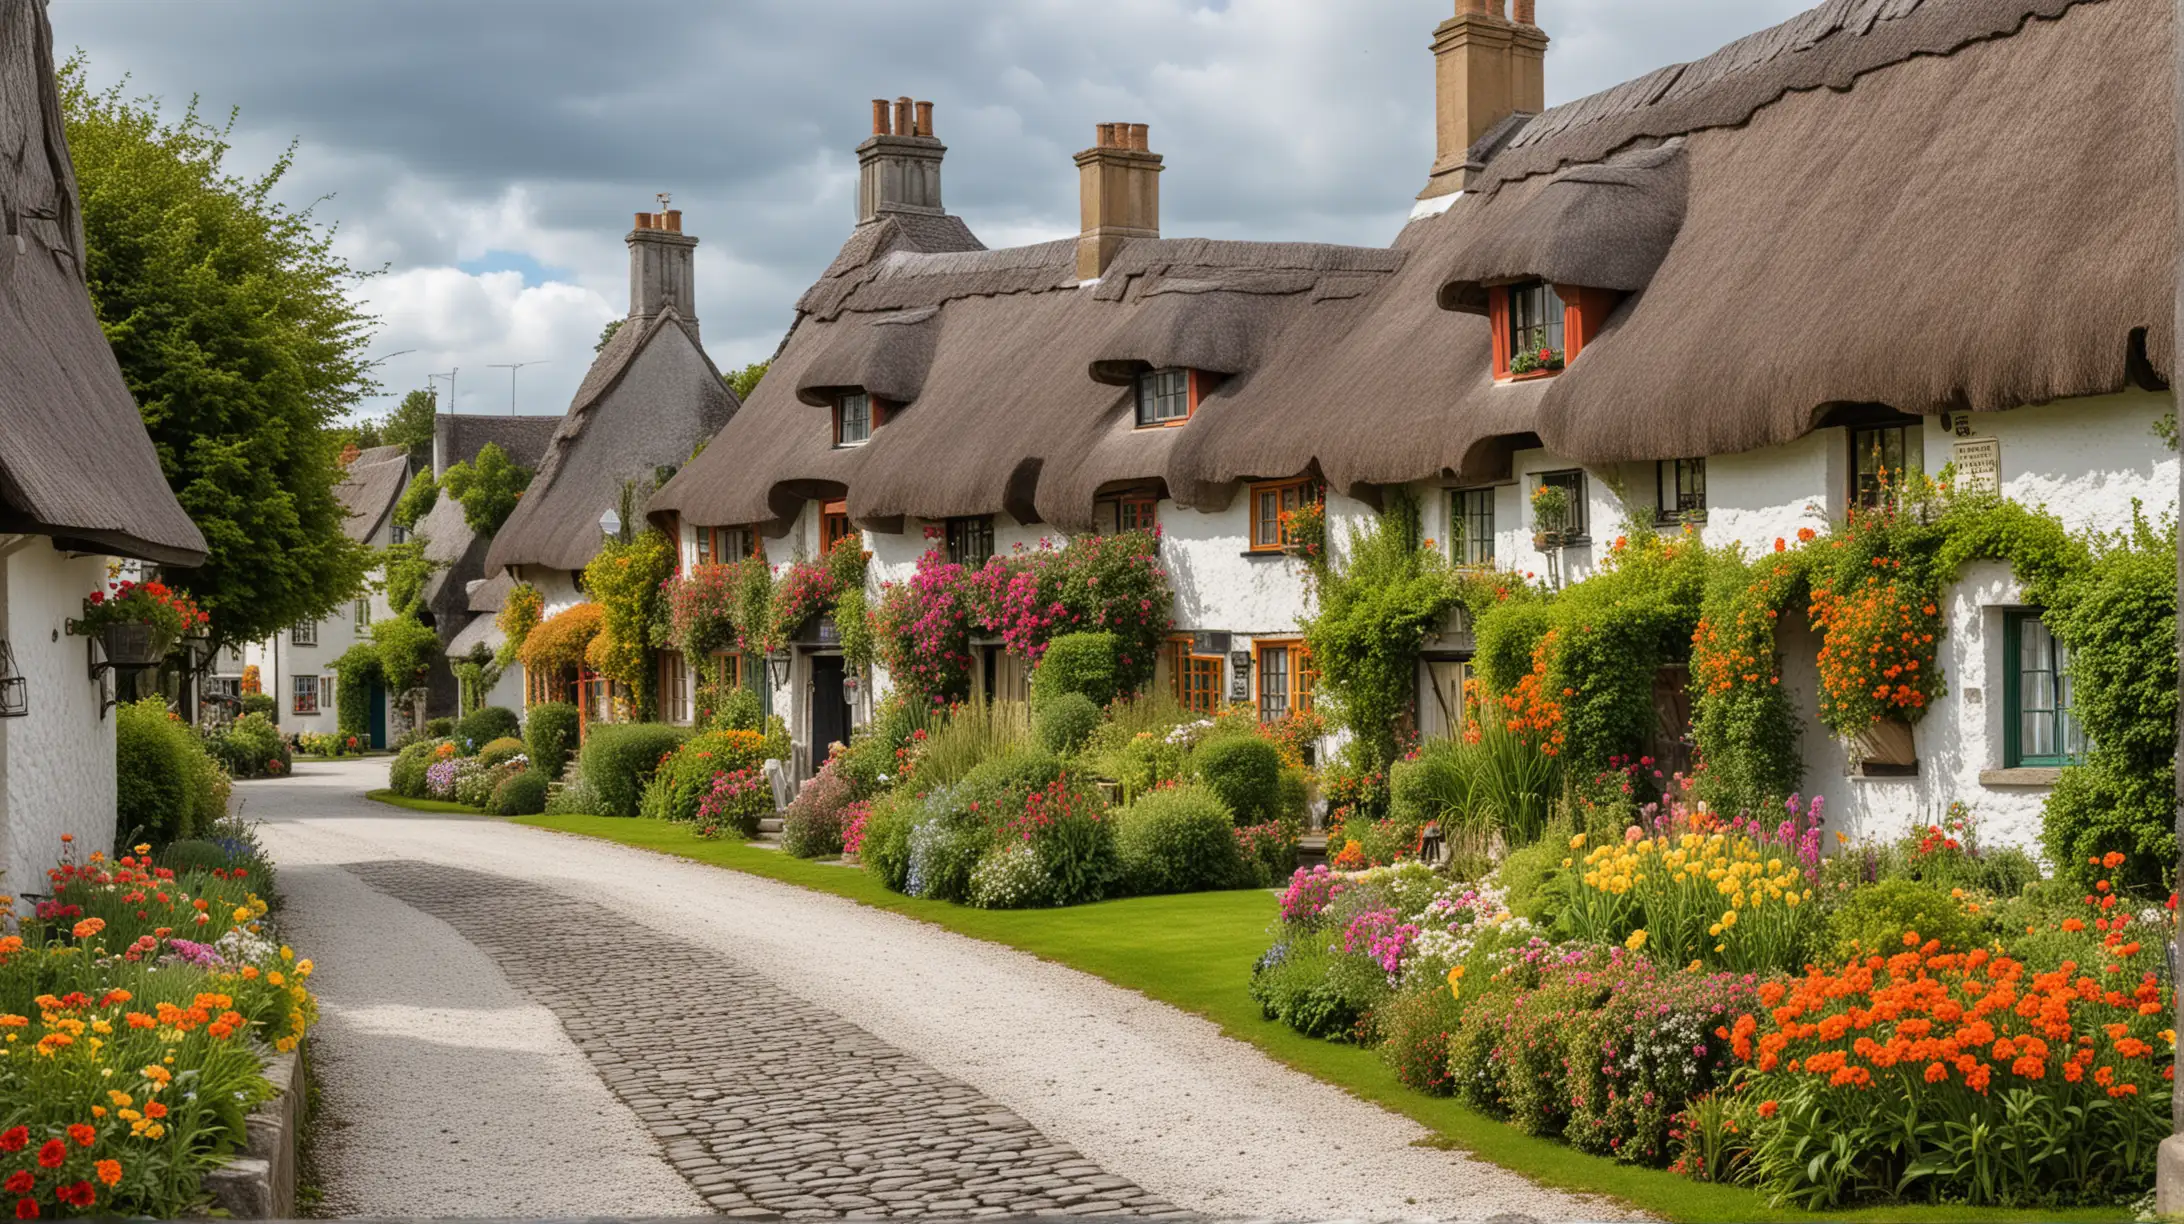 Quaint Thatched Cottage Village in Adare with Colorful Gardens